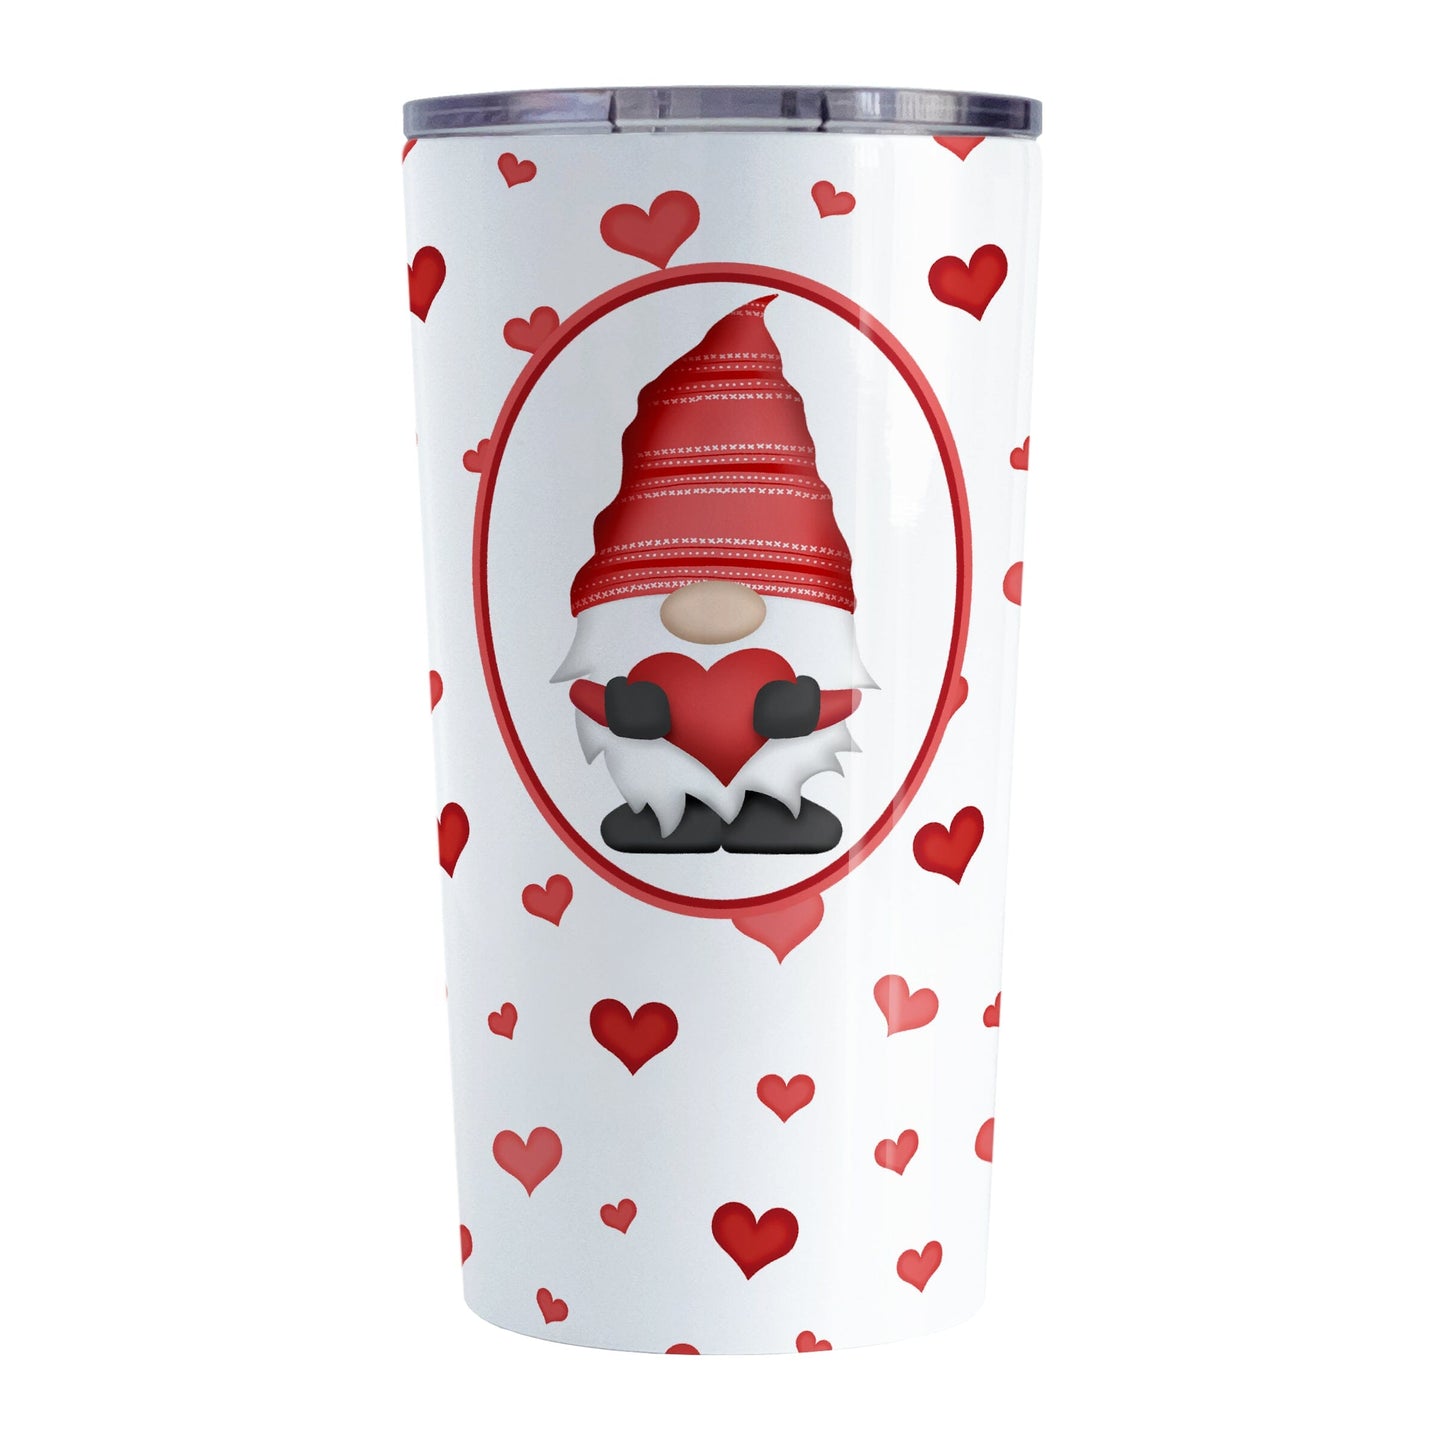 Red Gnome Dainty Hearts Tumbler Cup (20oz) at Amy's Coffee Mugs. A stainless steel tumbler cup designed with an adorable red gnome holding a heart in a white oval over a pattern of cute and dainty hearts in different shades of red that wrap around the cup.